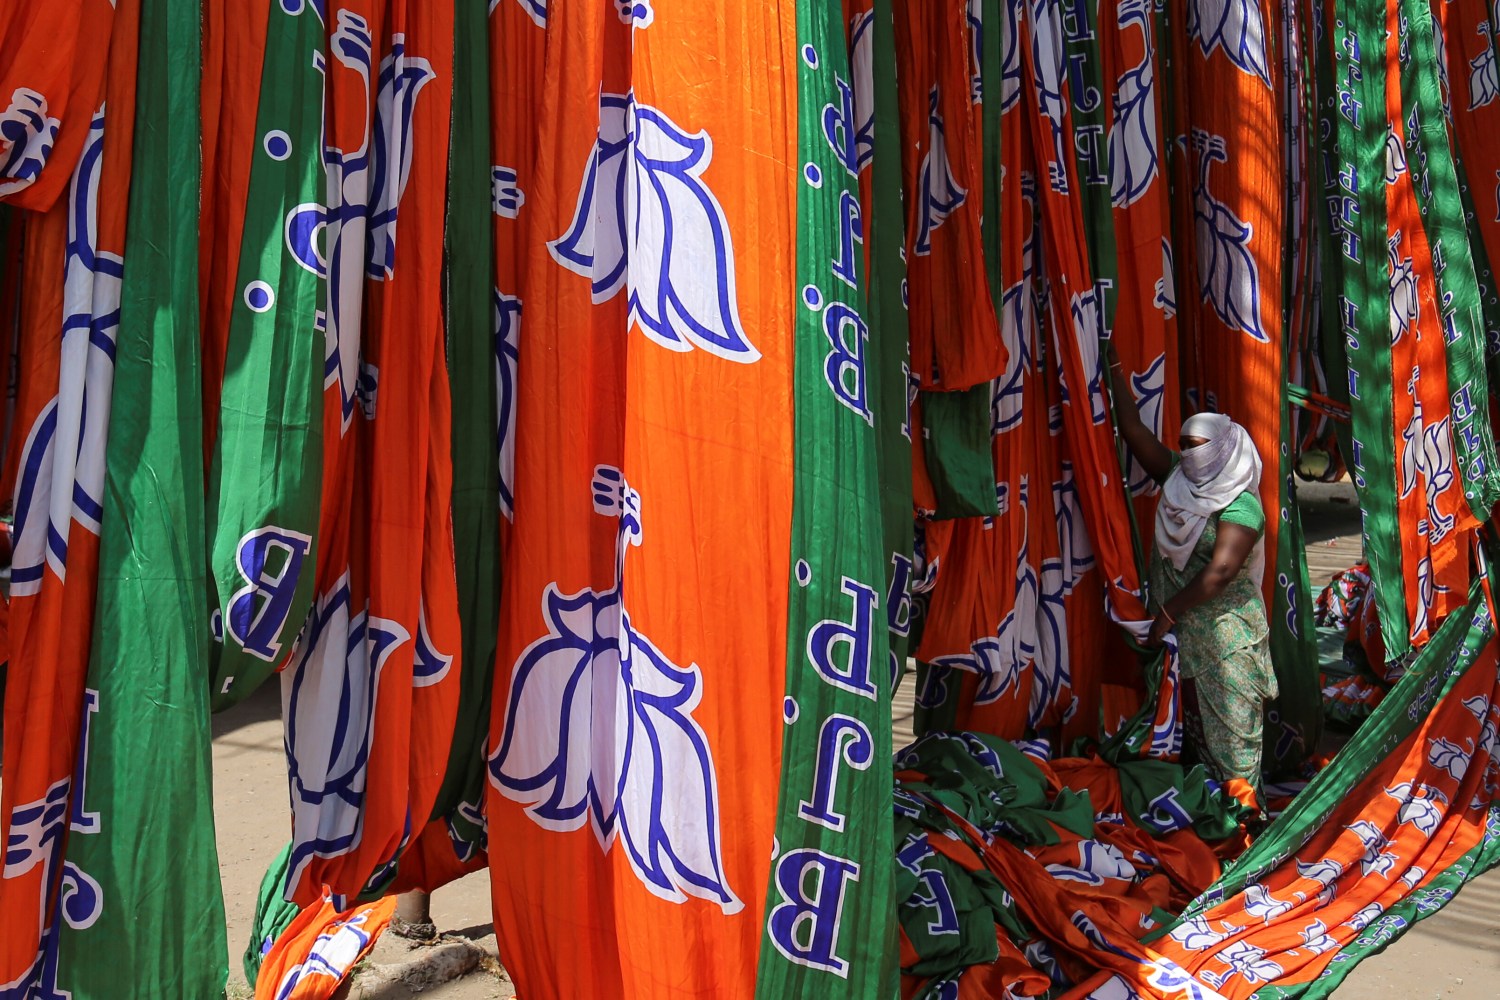 A worker pulls a roll of flags of India's ruling Bharatiya Janata Party (BJP) party kept for drying at a flag manufacturing factory, ahead of the 2019 general elections, in Ahmedabad, India, March 15, 2019. REUTERS/Amit Dave - RC120850C5B0